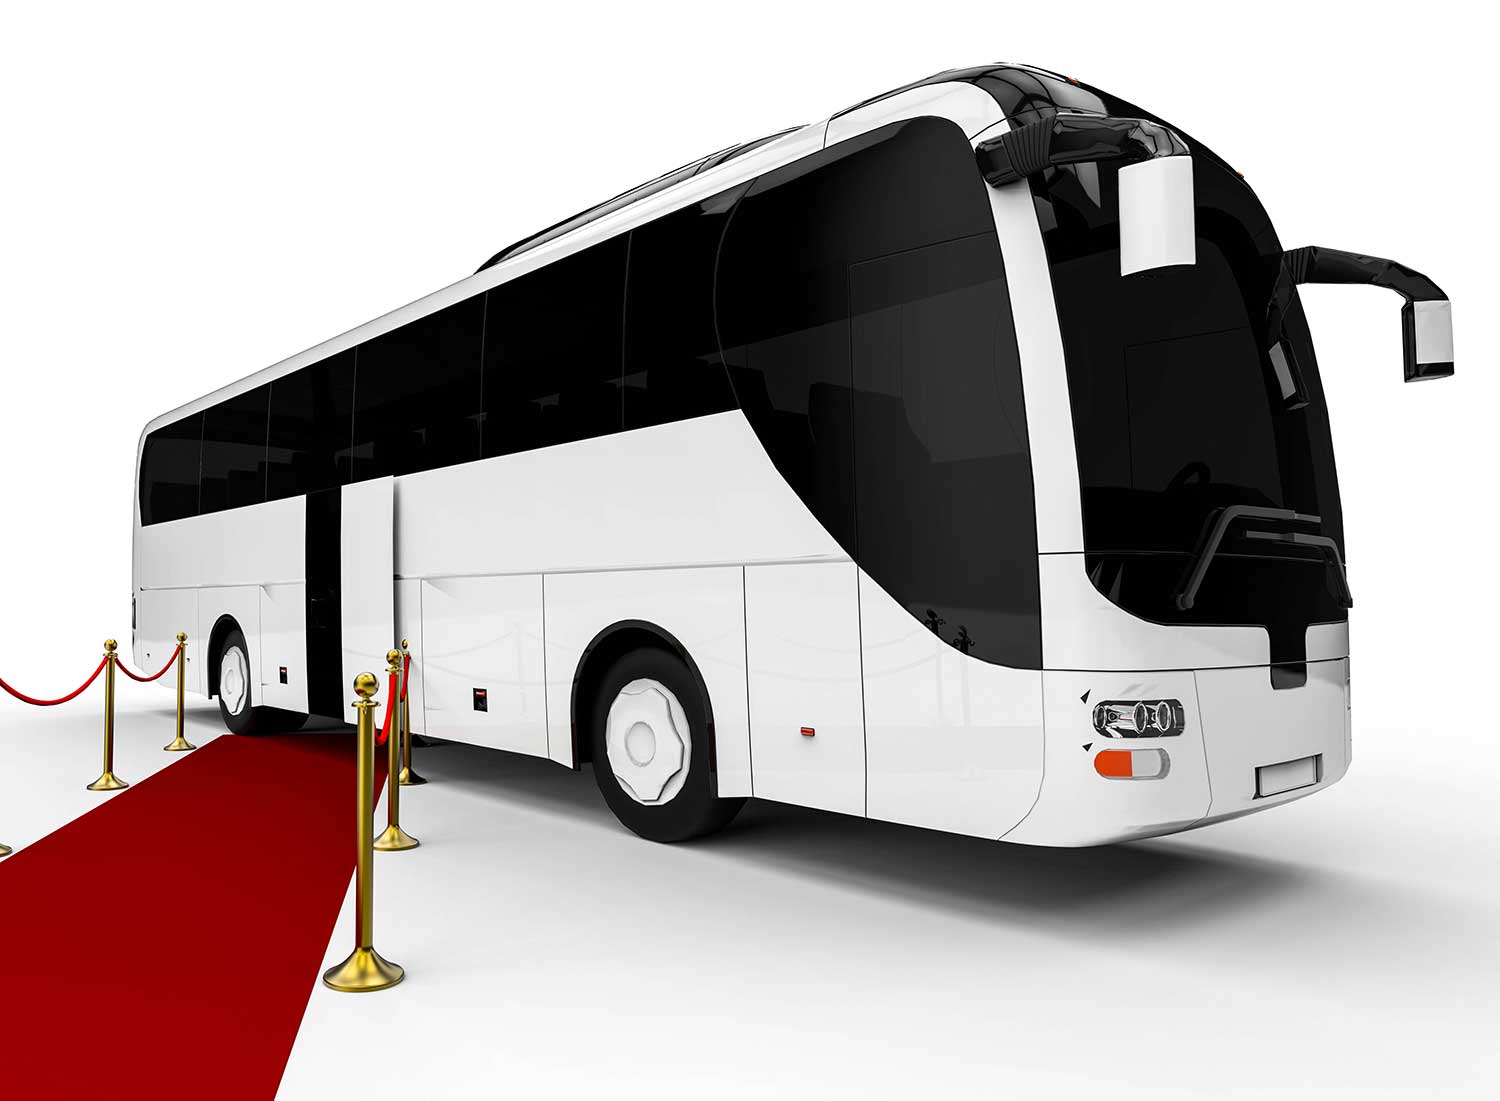 Lakeland Party Bus - Photo of a bus with a red carpet in front